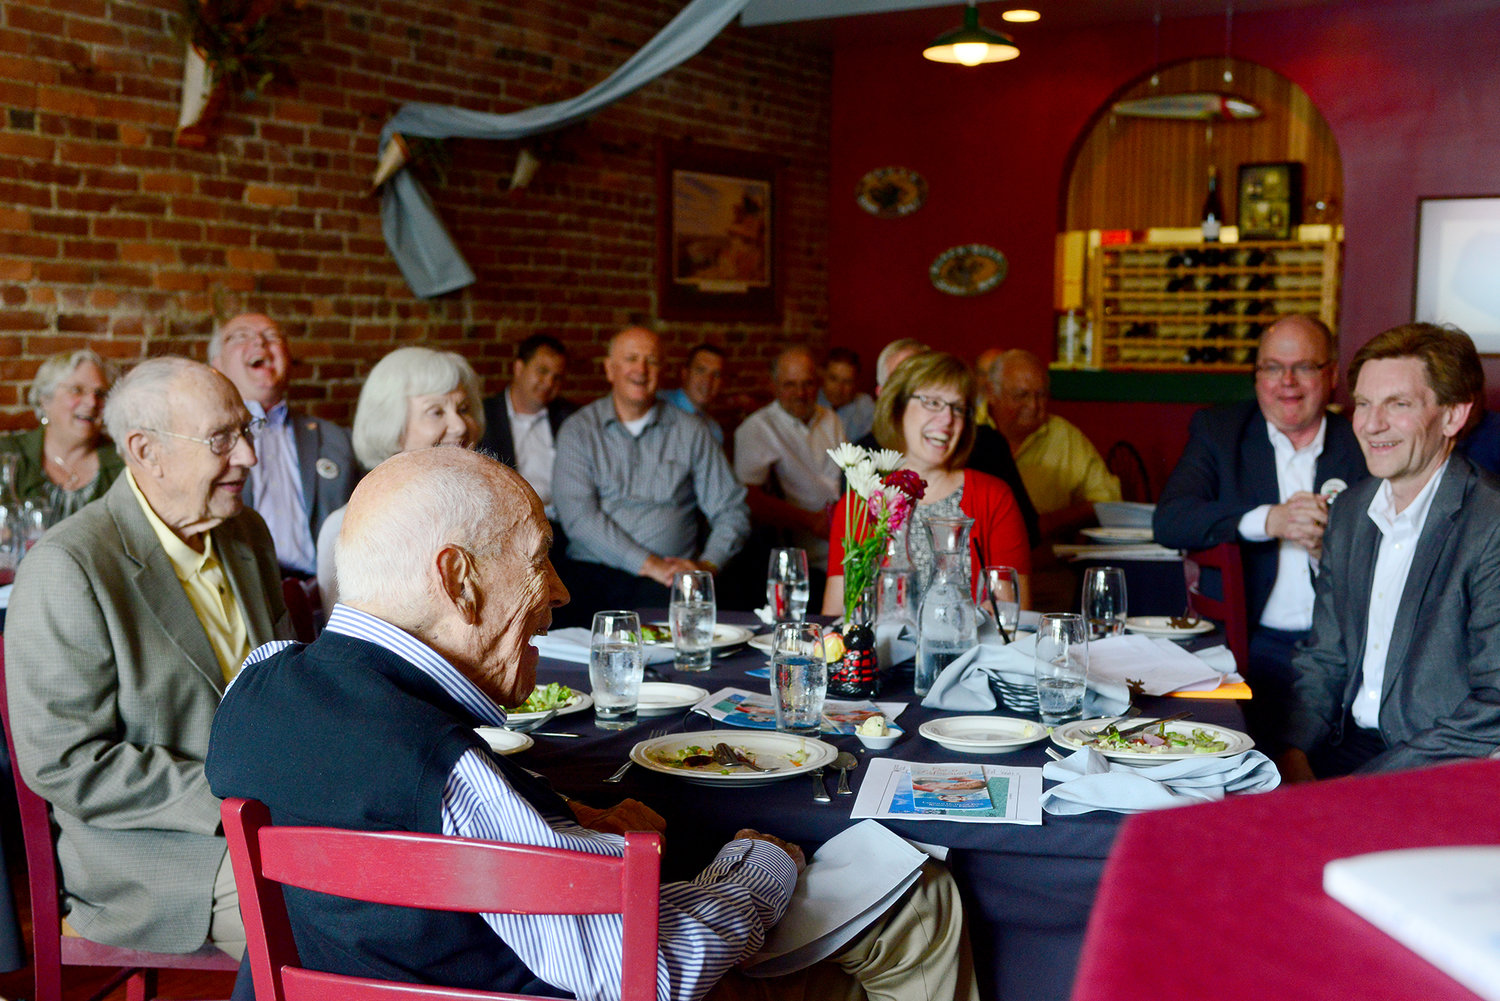 The crowd at a Chehalis Foundation luncheon laughs after hearing a joke from Gail Shaw, center-left, on Friday afternoon at Mackinaw's in Chehalis.